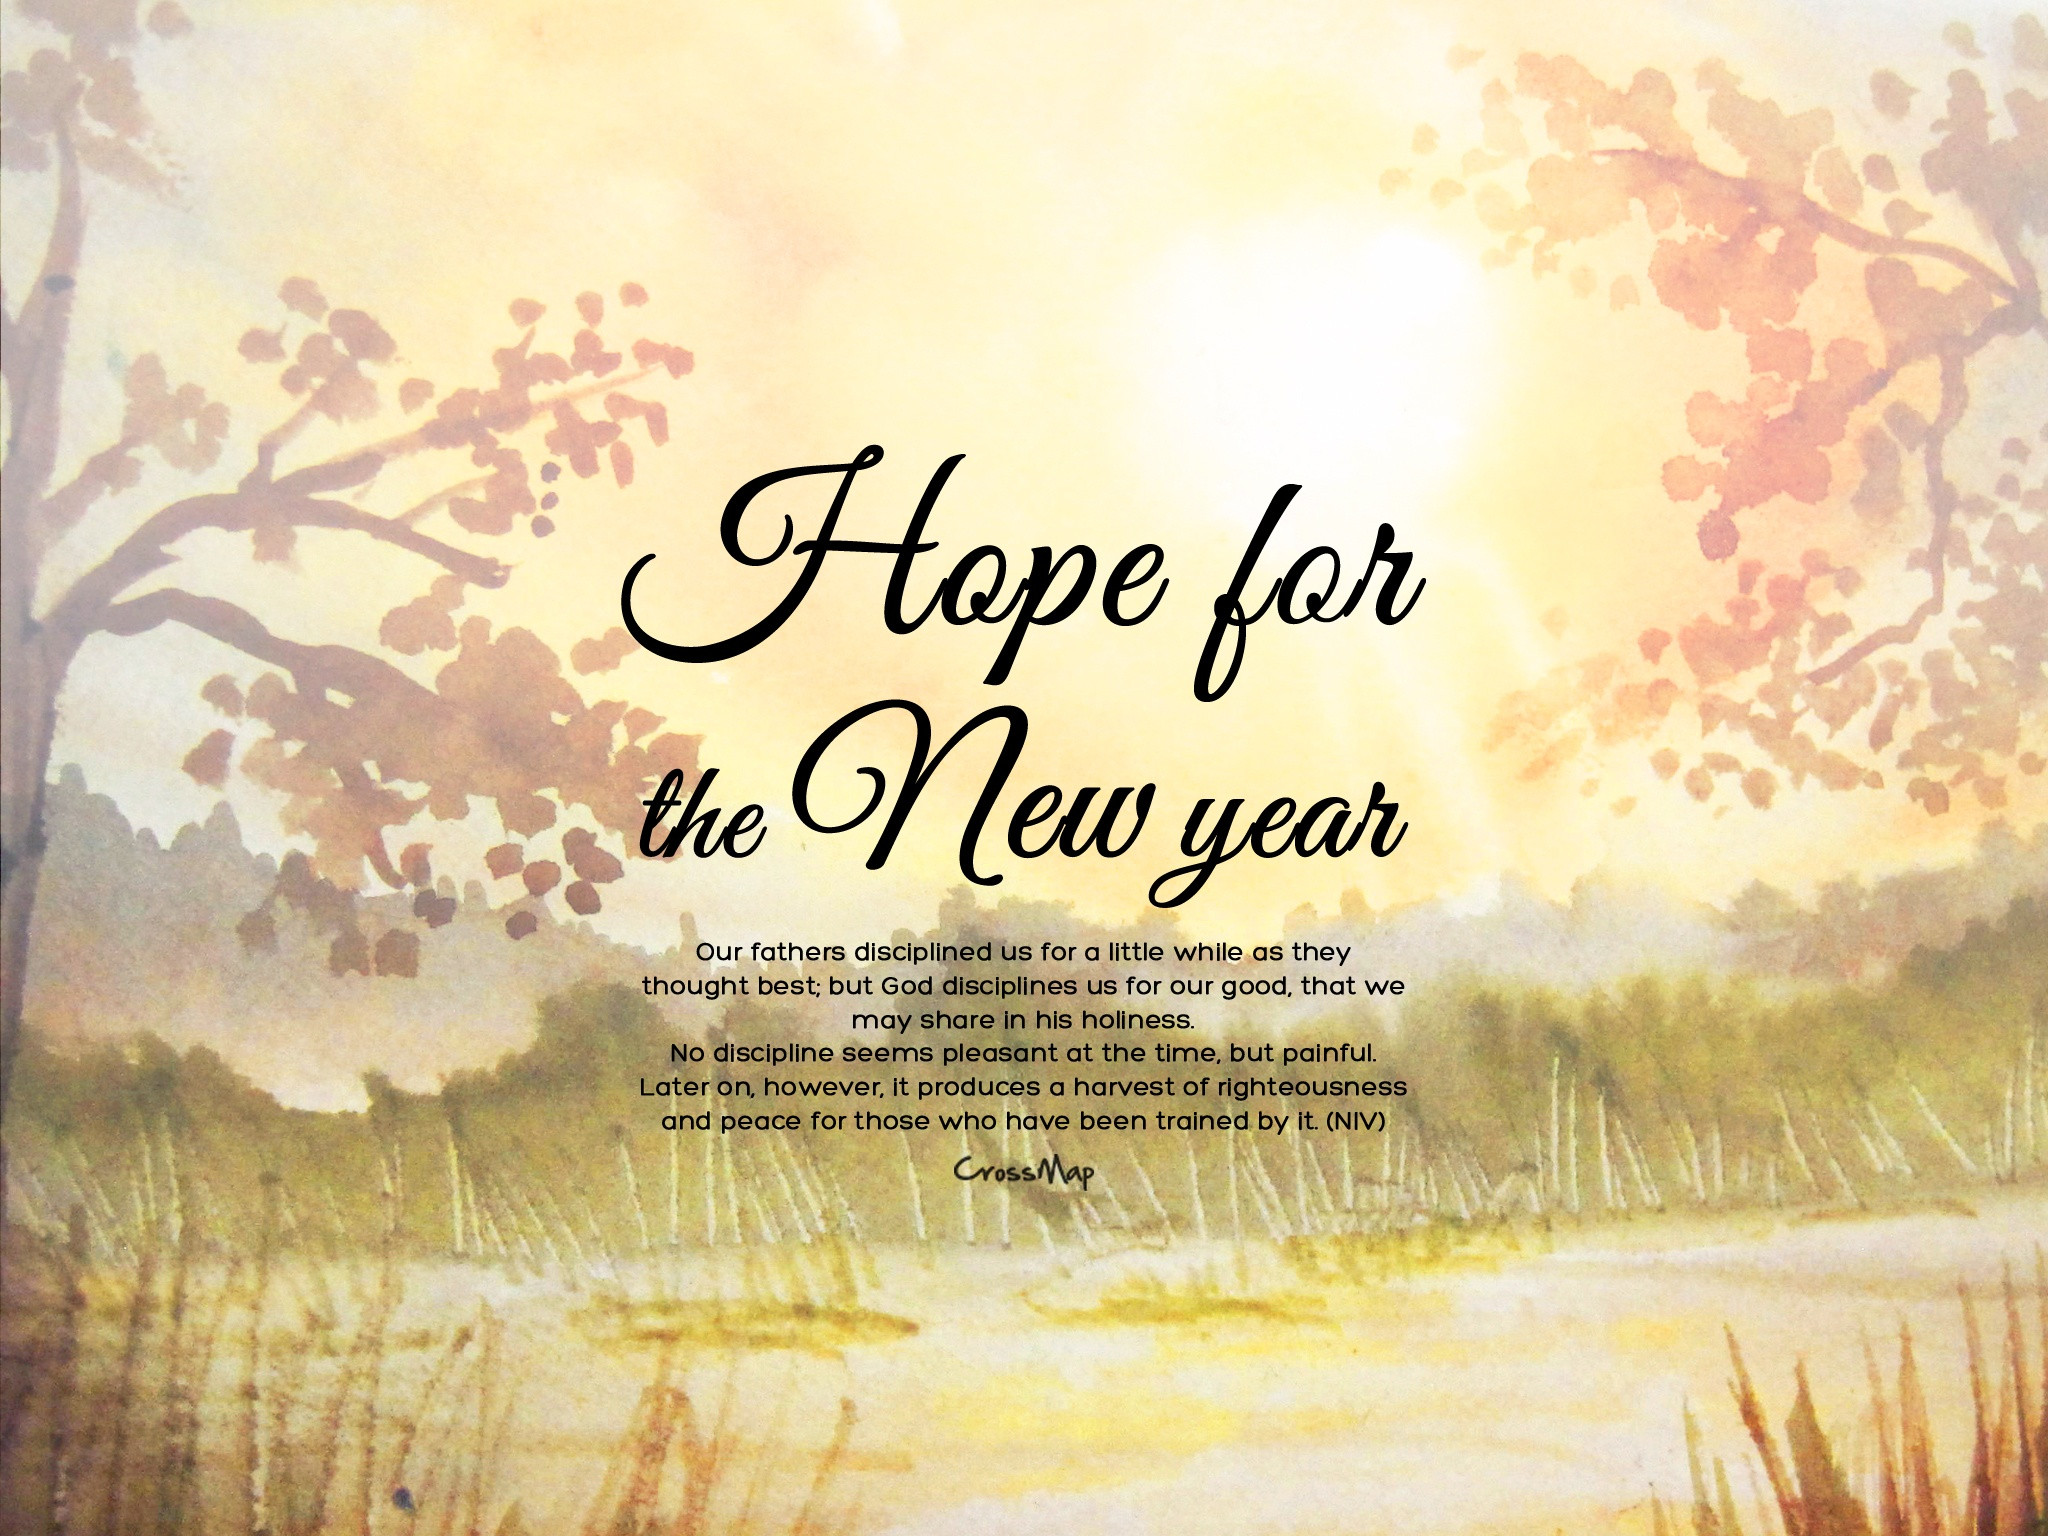 Christian New Year Quotes
 Christian New Year Quotes 2019 Download Daily SMS